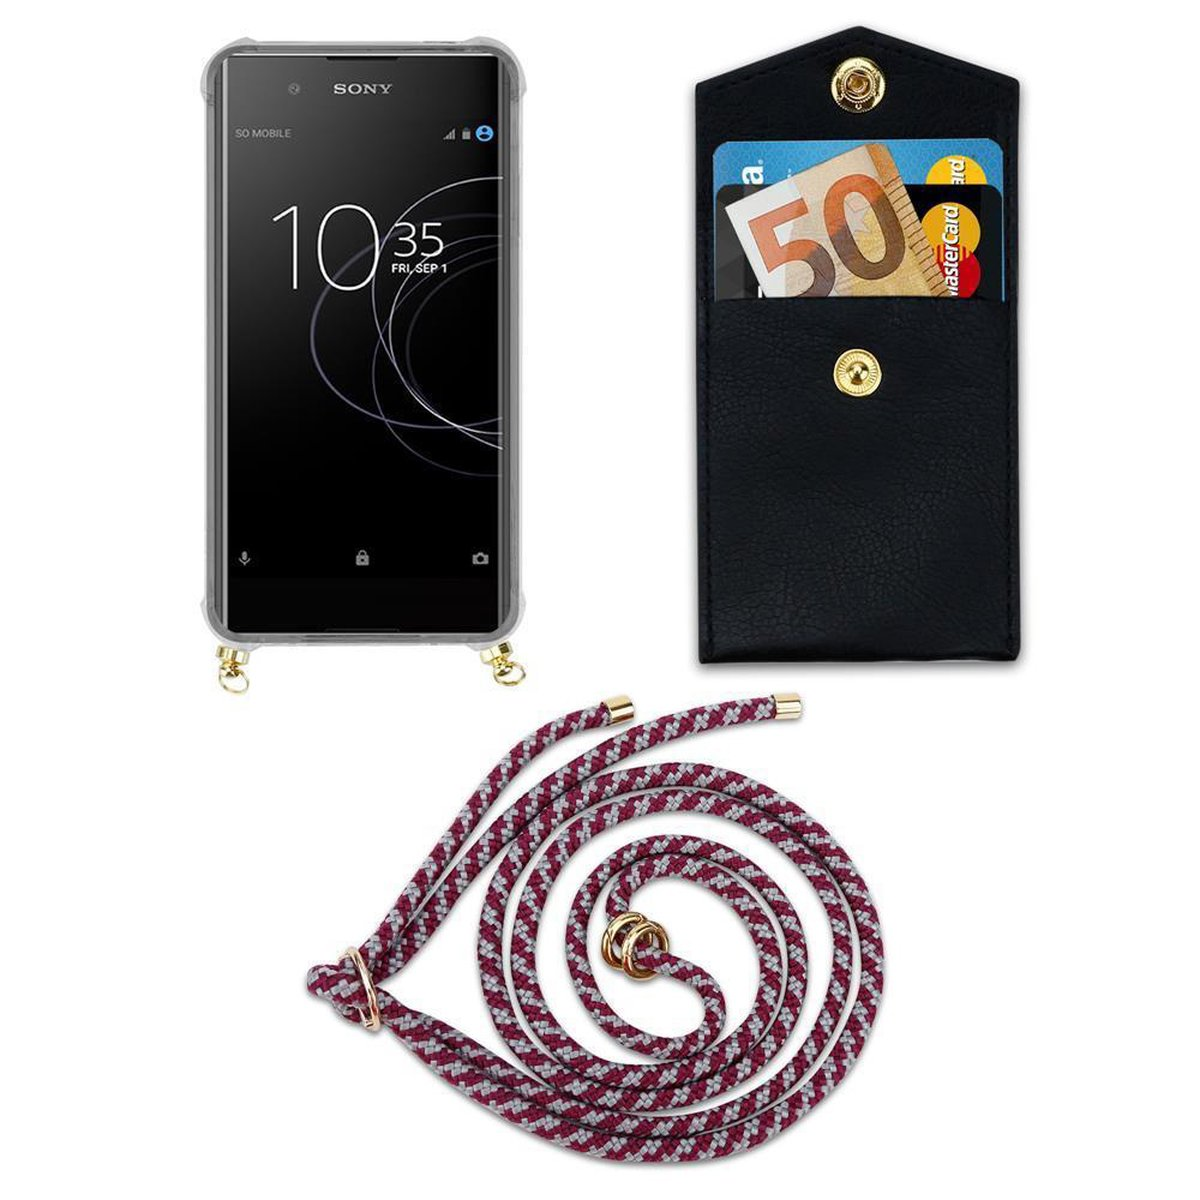 CADORABO Handy Kette mit Gold ULTRA, Hülle, XA1 Kordel abnehmbarer Band WEIß Xperia Sony, Ringen, und Backcover, ROT